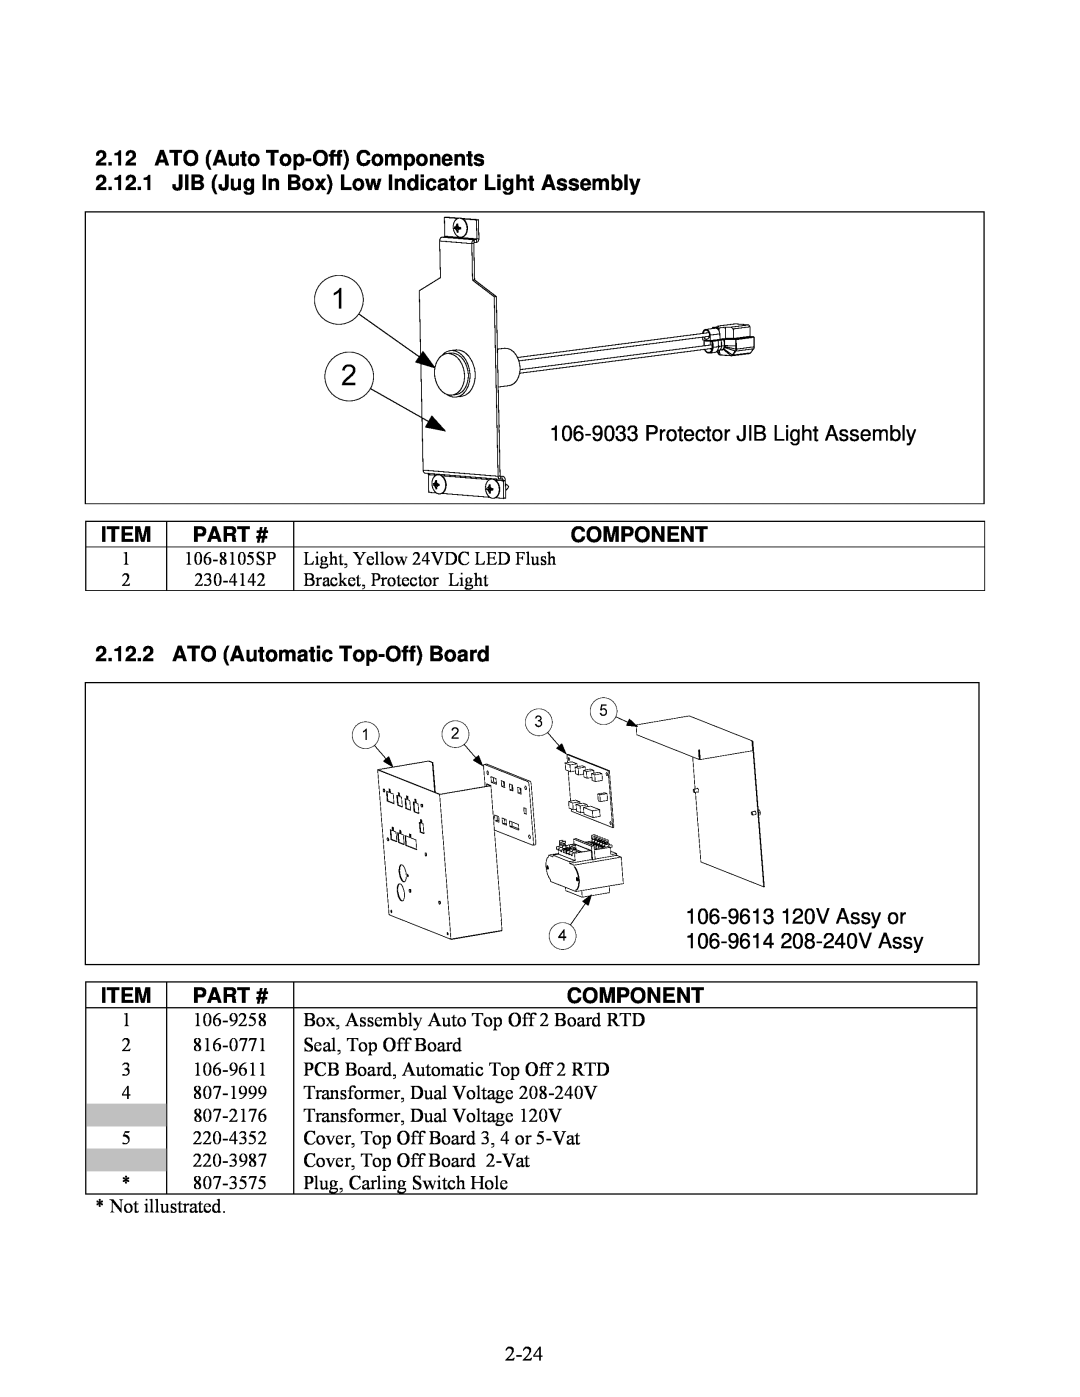 Frymaster 8196345 manual ATO Auto Top-OffComponents, Item Part #, ATO Automatic Top-OffBoard 